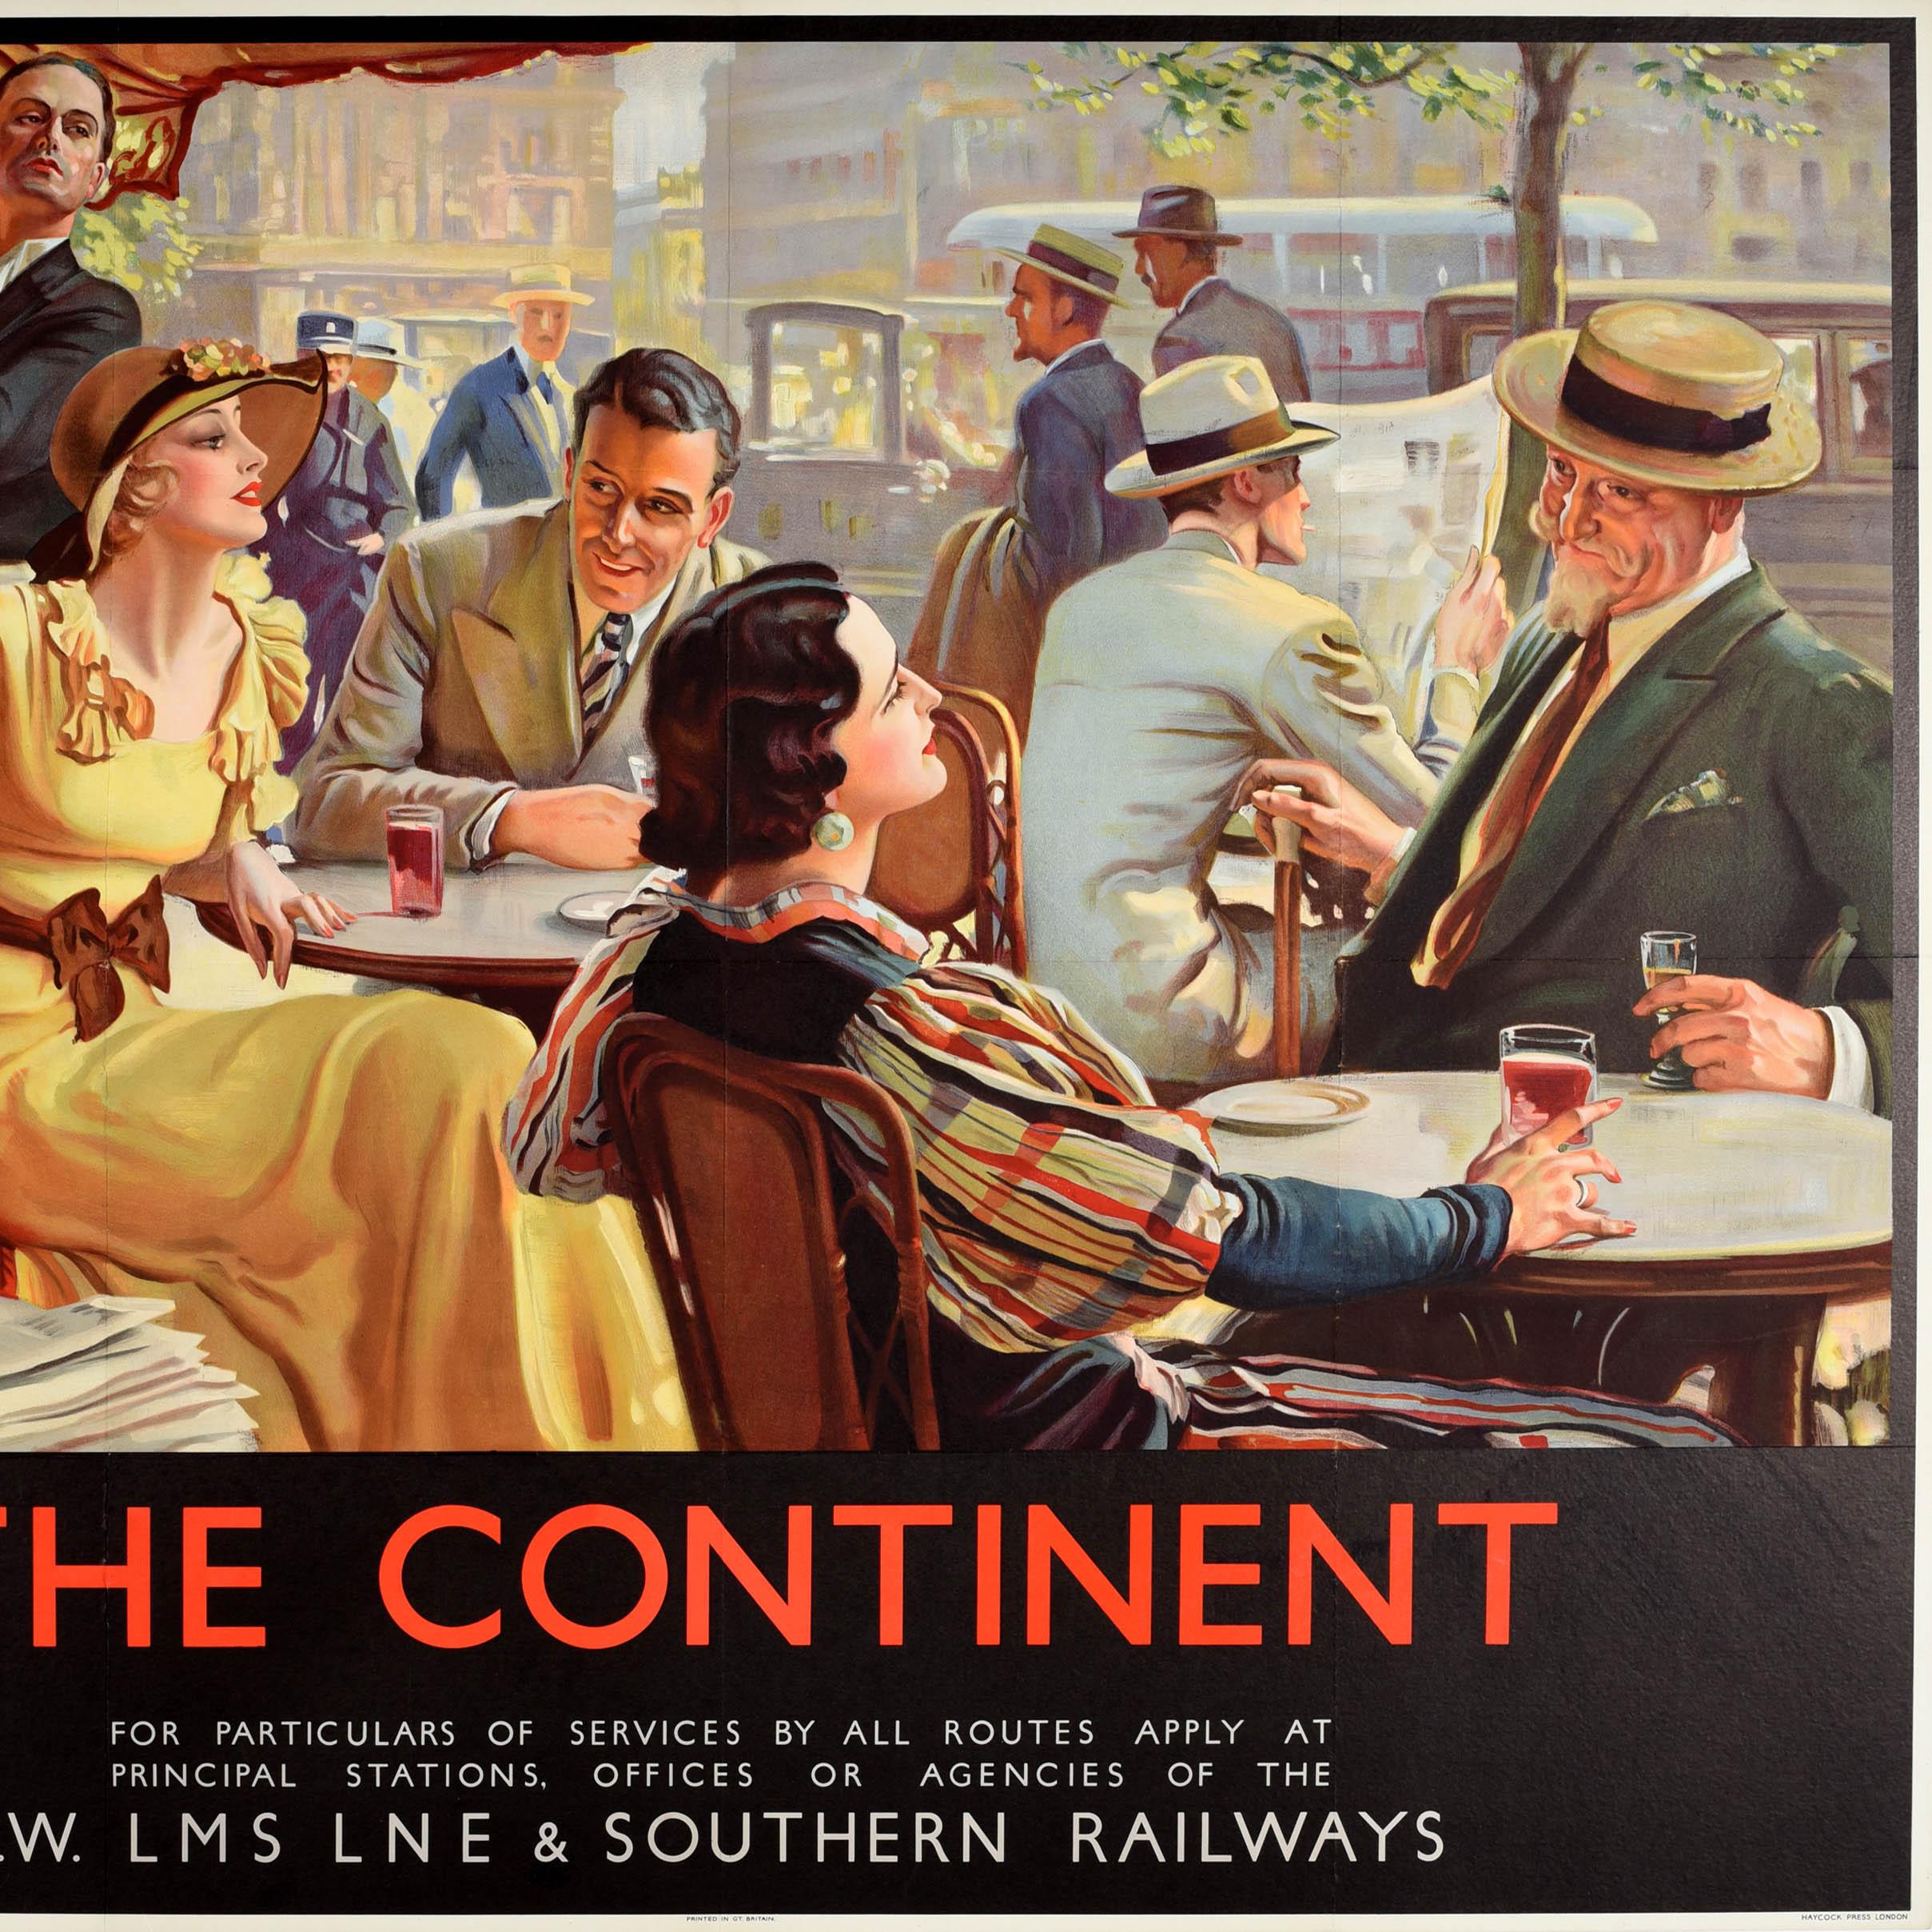 Original vintage Art Deco travel poster - The Continent - issued by the Great Western Railway GWR, London Midland & Scottish Railway LMS, London & North Eastern Railway LNER and Southern Railway to promote their joint train and ferry services to